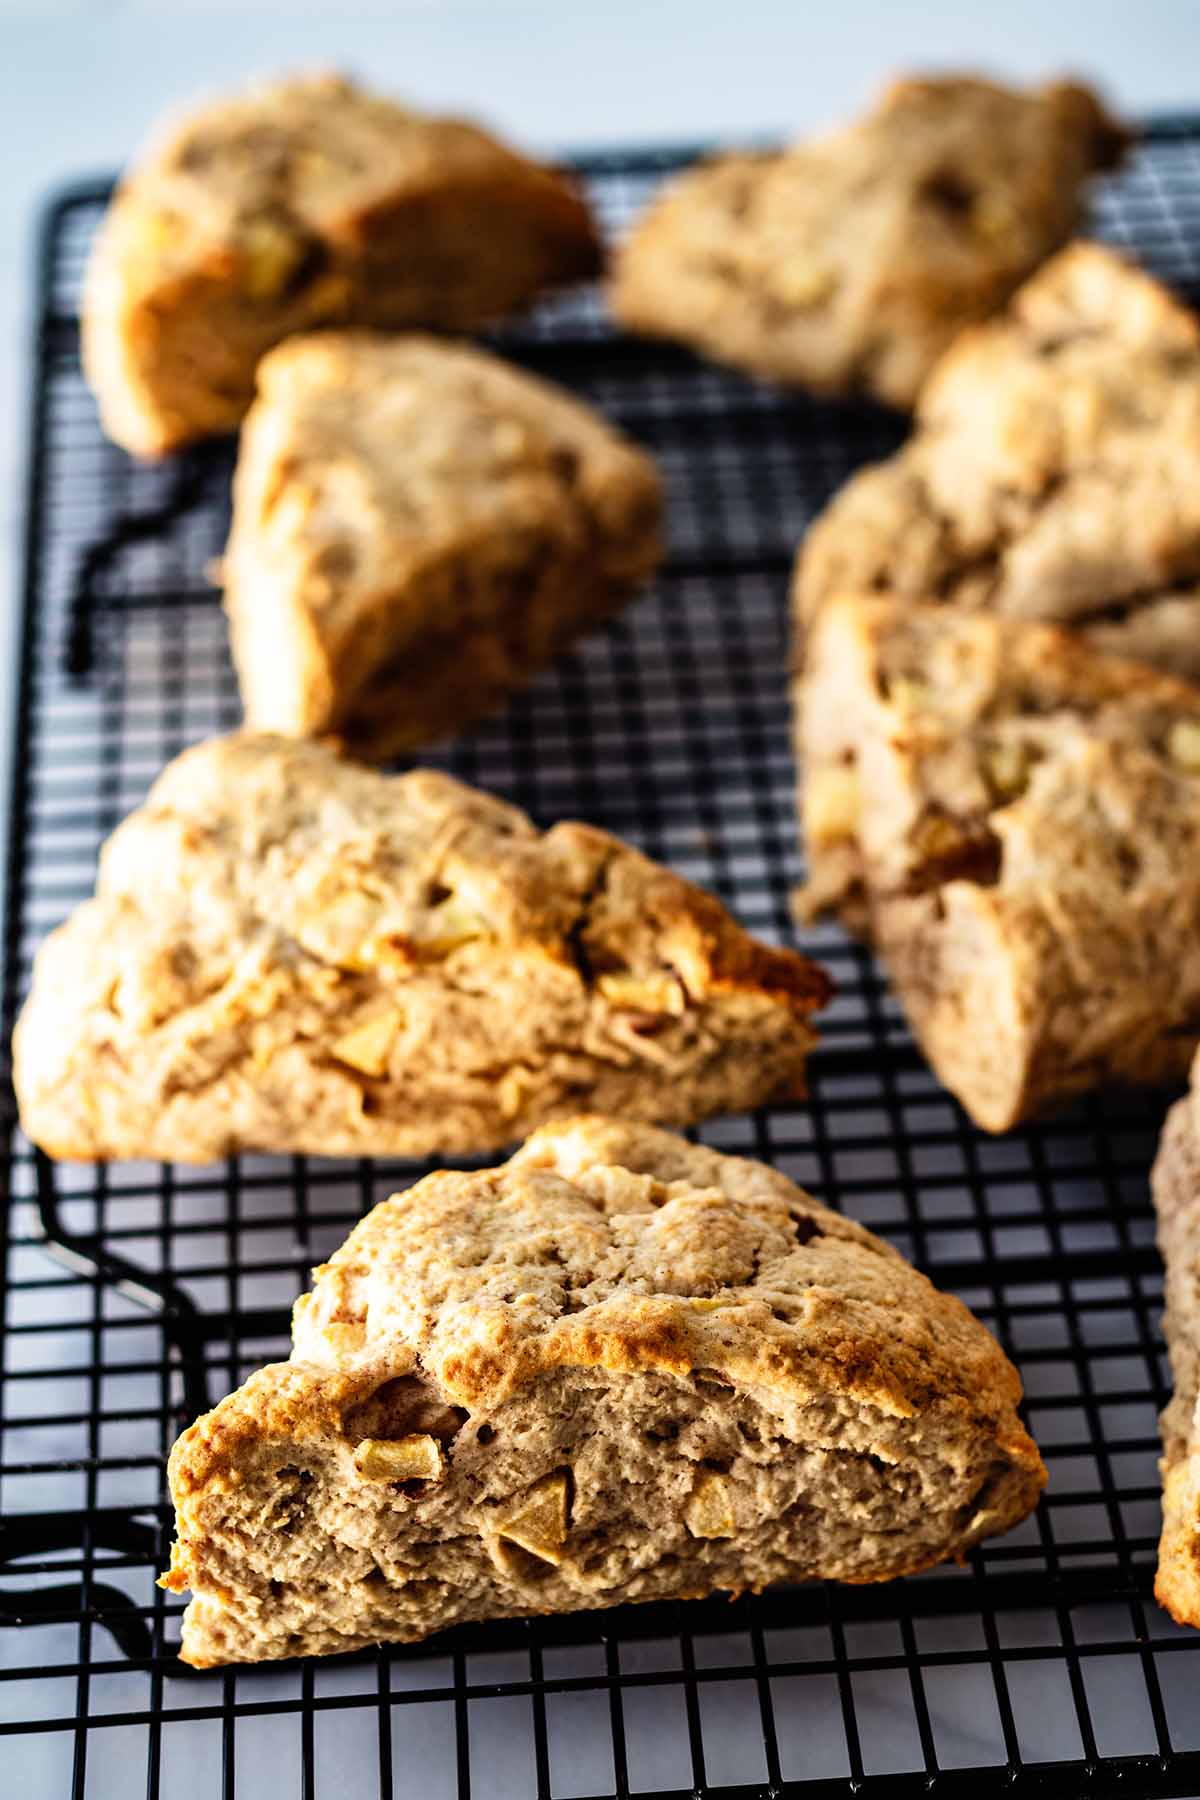 Apple scones are cooled on a cooling rack